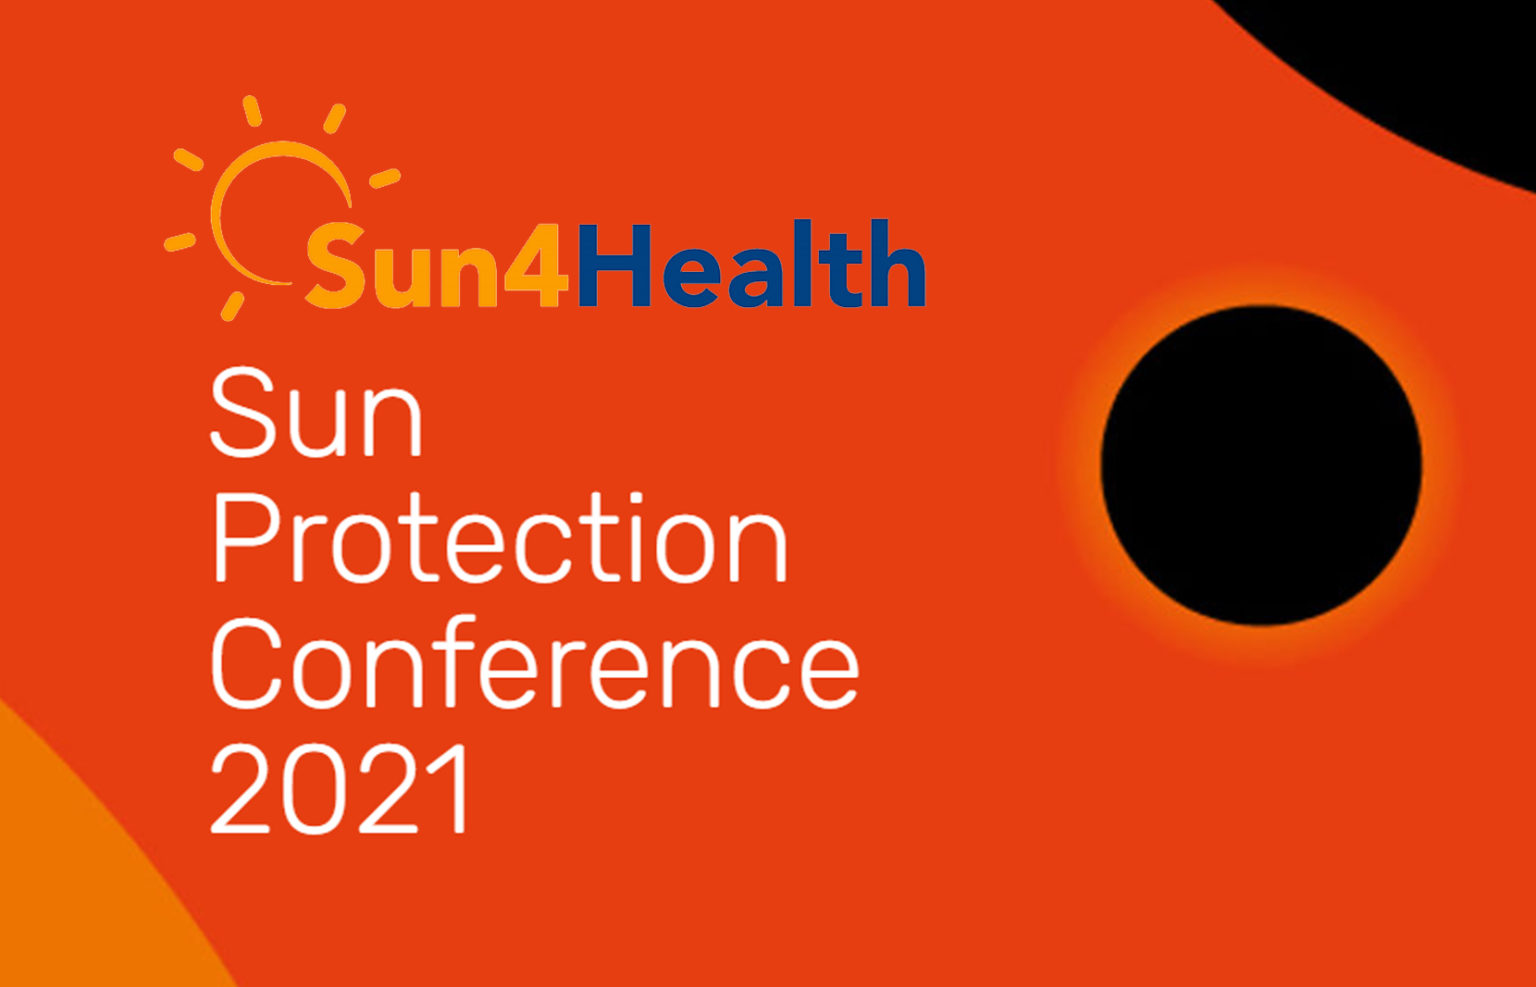 Sun4Health at the Sun Protection Conference 2021 siHealth